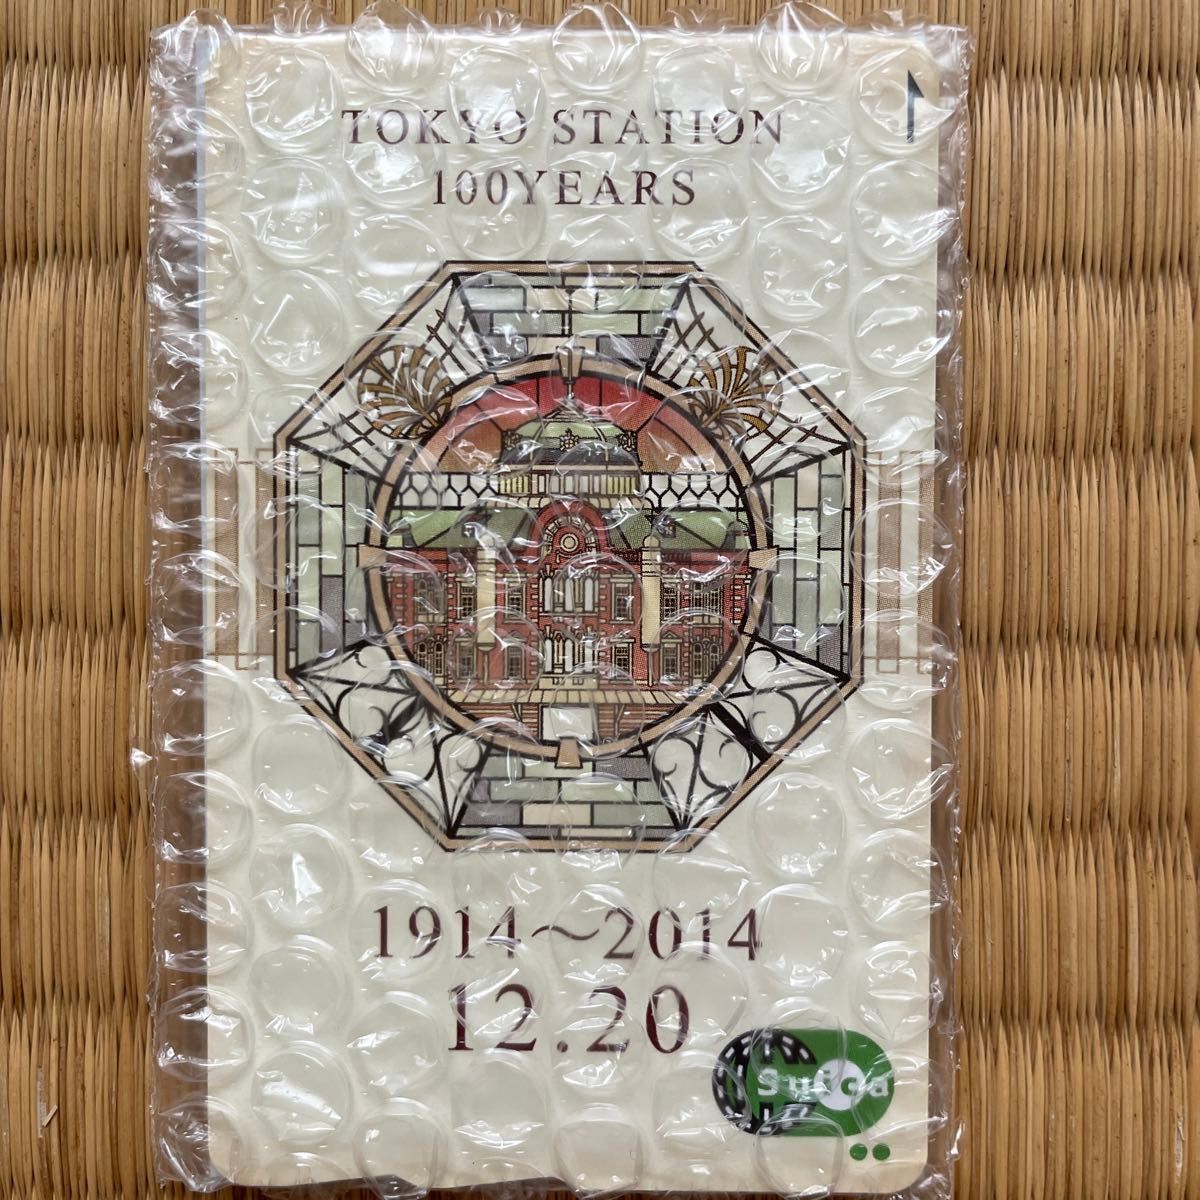 Suica TOKYO STATION 100YEARS 台紙付き（残高０円） - コレクション